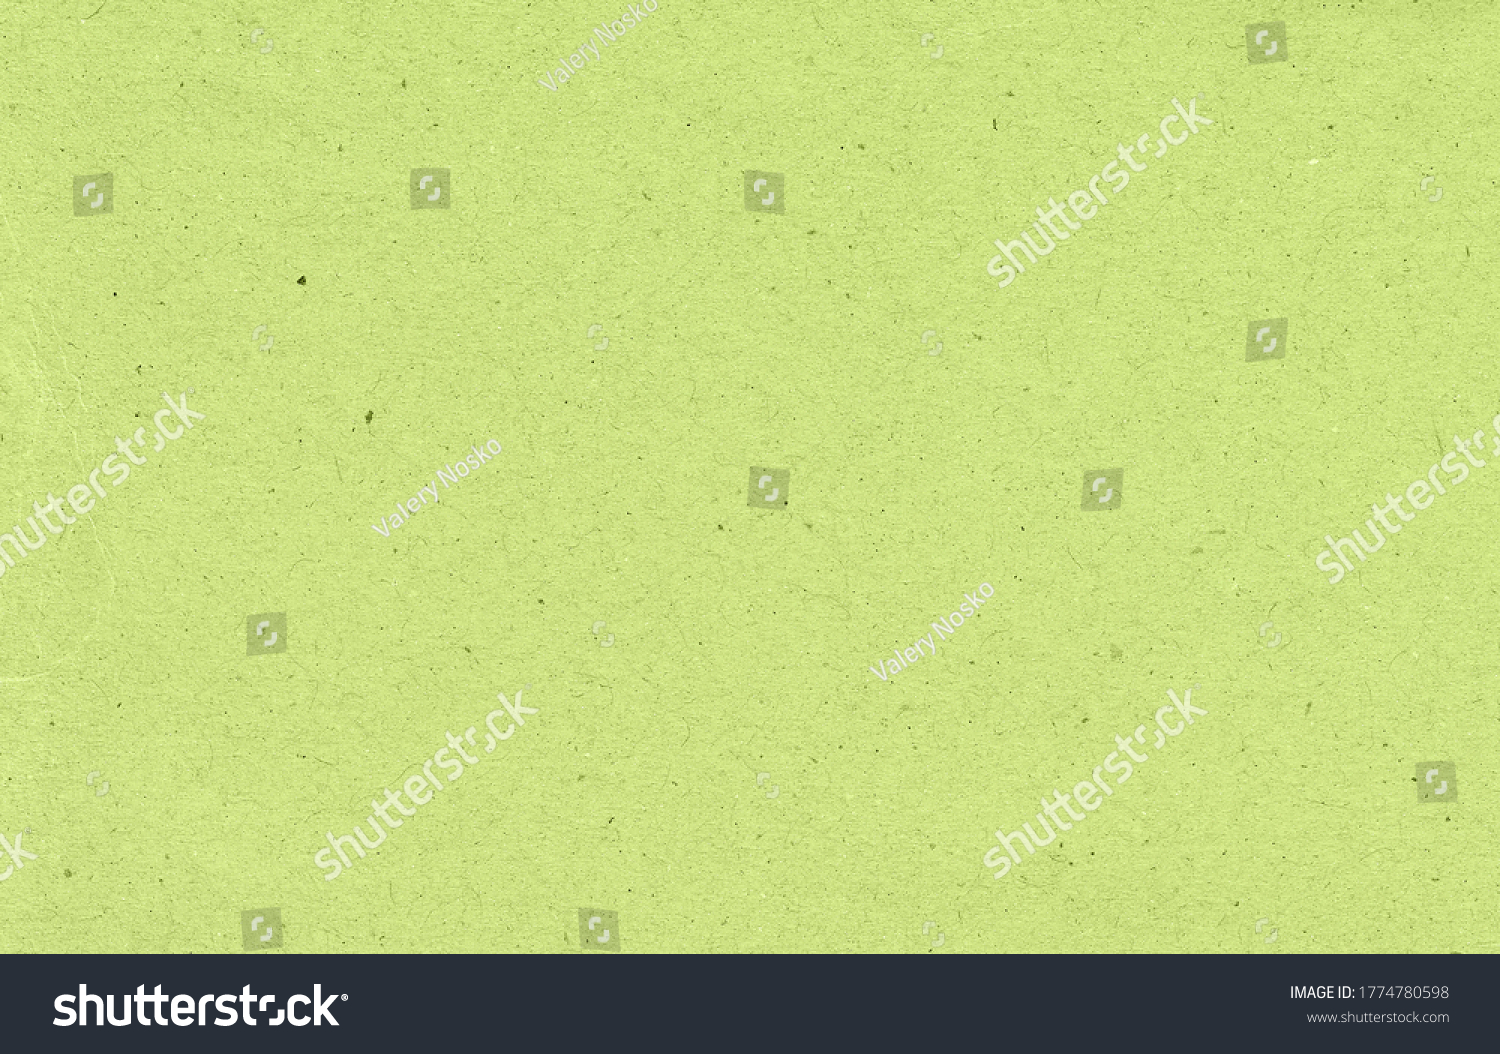 Green recycled paper background and texture. #1774780598